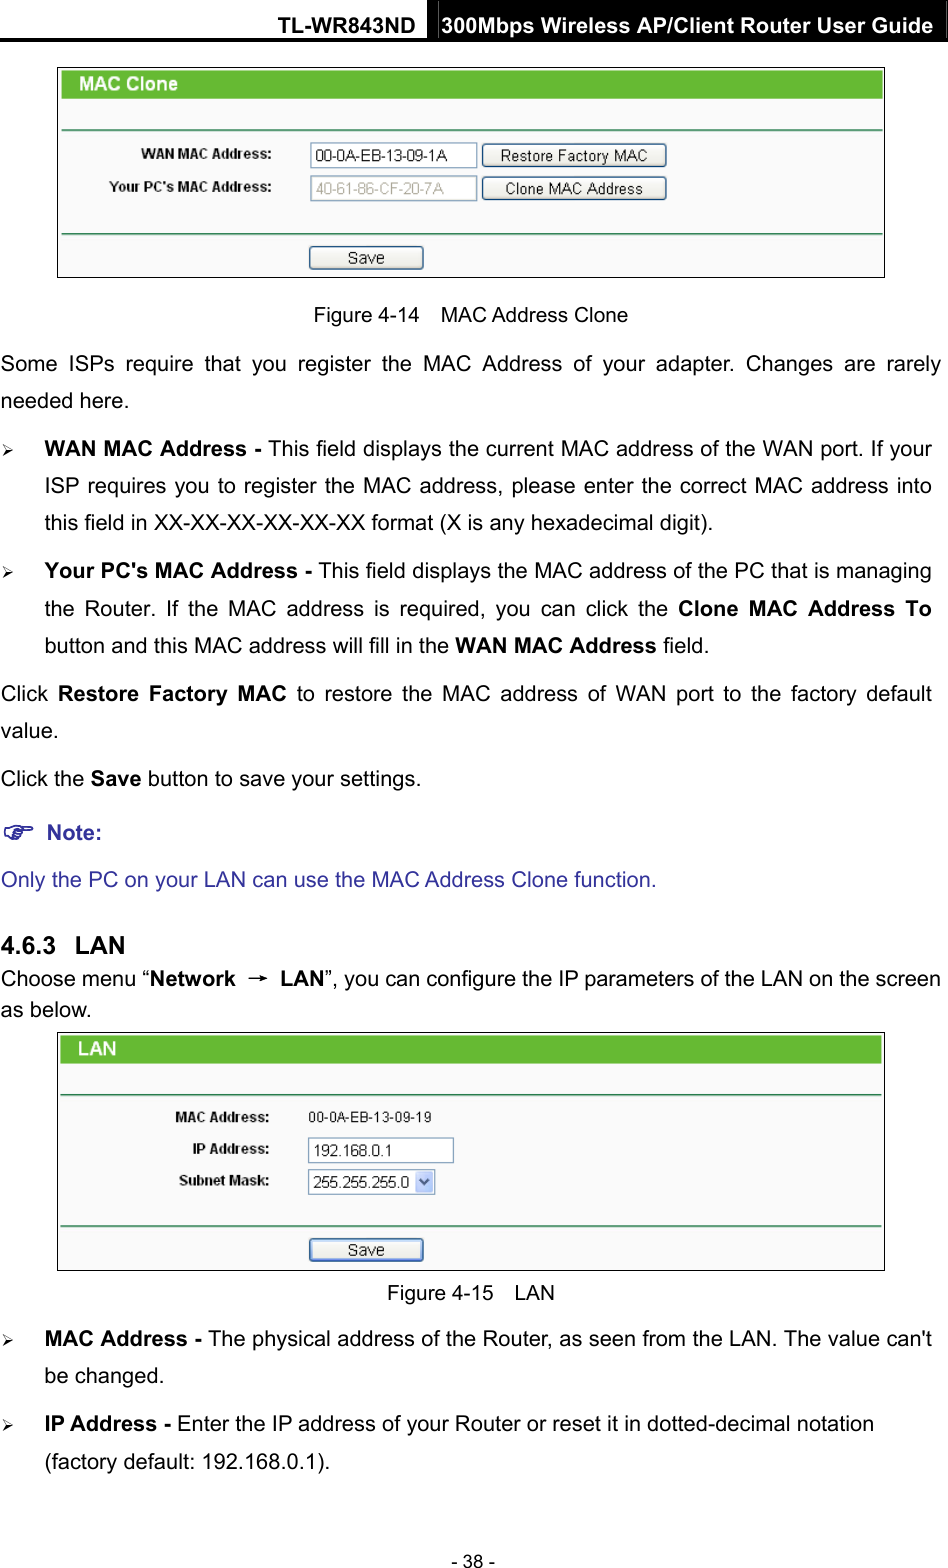 TL-WR843ND 300Mbps Wireless AP/Client Router User Guide - 38 -  Figure 4-14  MAC Address Clone Some ISPs require that you register the MAC Address of your adapter. Changes are rarely needed here.  WAN MAC Address - This field displays the current MAC address of the WAN port. If your ISP requires you to register the MAC address, please enter the correct MAC address into this field in XX-XX-XX-XX-XX-XX format (X is any hexadecimal digit).    Your PC&apos;s MAC Address - This field displays the MAC address of the PC that is managing the Router. If the MAC address is required, you can click the Clone MAC Address To button and this MAC address will fill in the WAN MAC Address field. Click  Restore Factory MAC to restore the MAC address of WAN port to the factory default value. Click the Save button to save your settings.  Note:  Only the PC on your LAN can use the MAC Address Clone function. 4.6.3  LAN Choose menu “Network  → LAN”, you can configure the IP parameters of the LAN on the screen as below.  Figure 4-15  LAN  MAC Address - The physical address of the Router, as seen from the LAN. The value can&apos;t be changed.  IP Address - Enter the IP address of your Router or reset it in dotted-decimal notation (factory default: 192.168.0.1). 